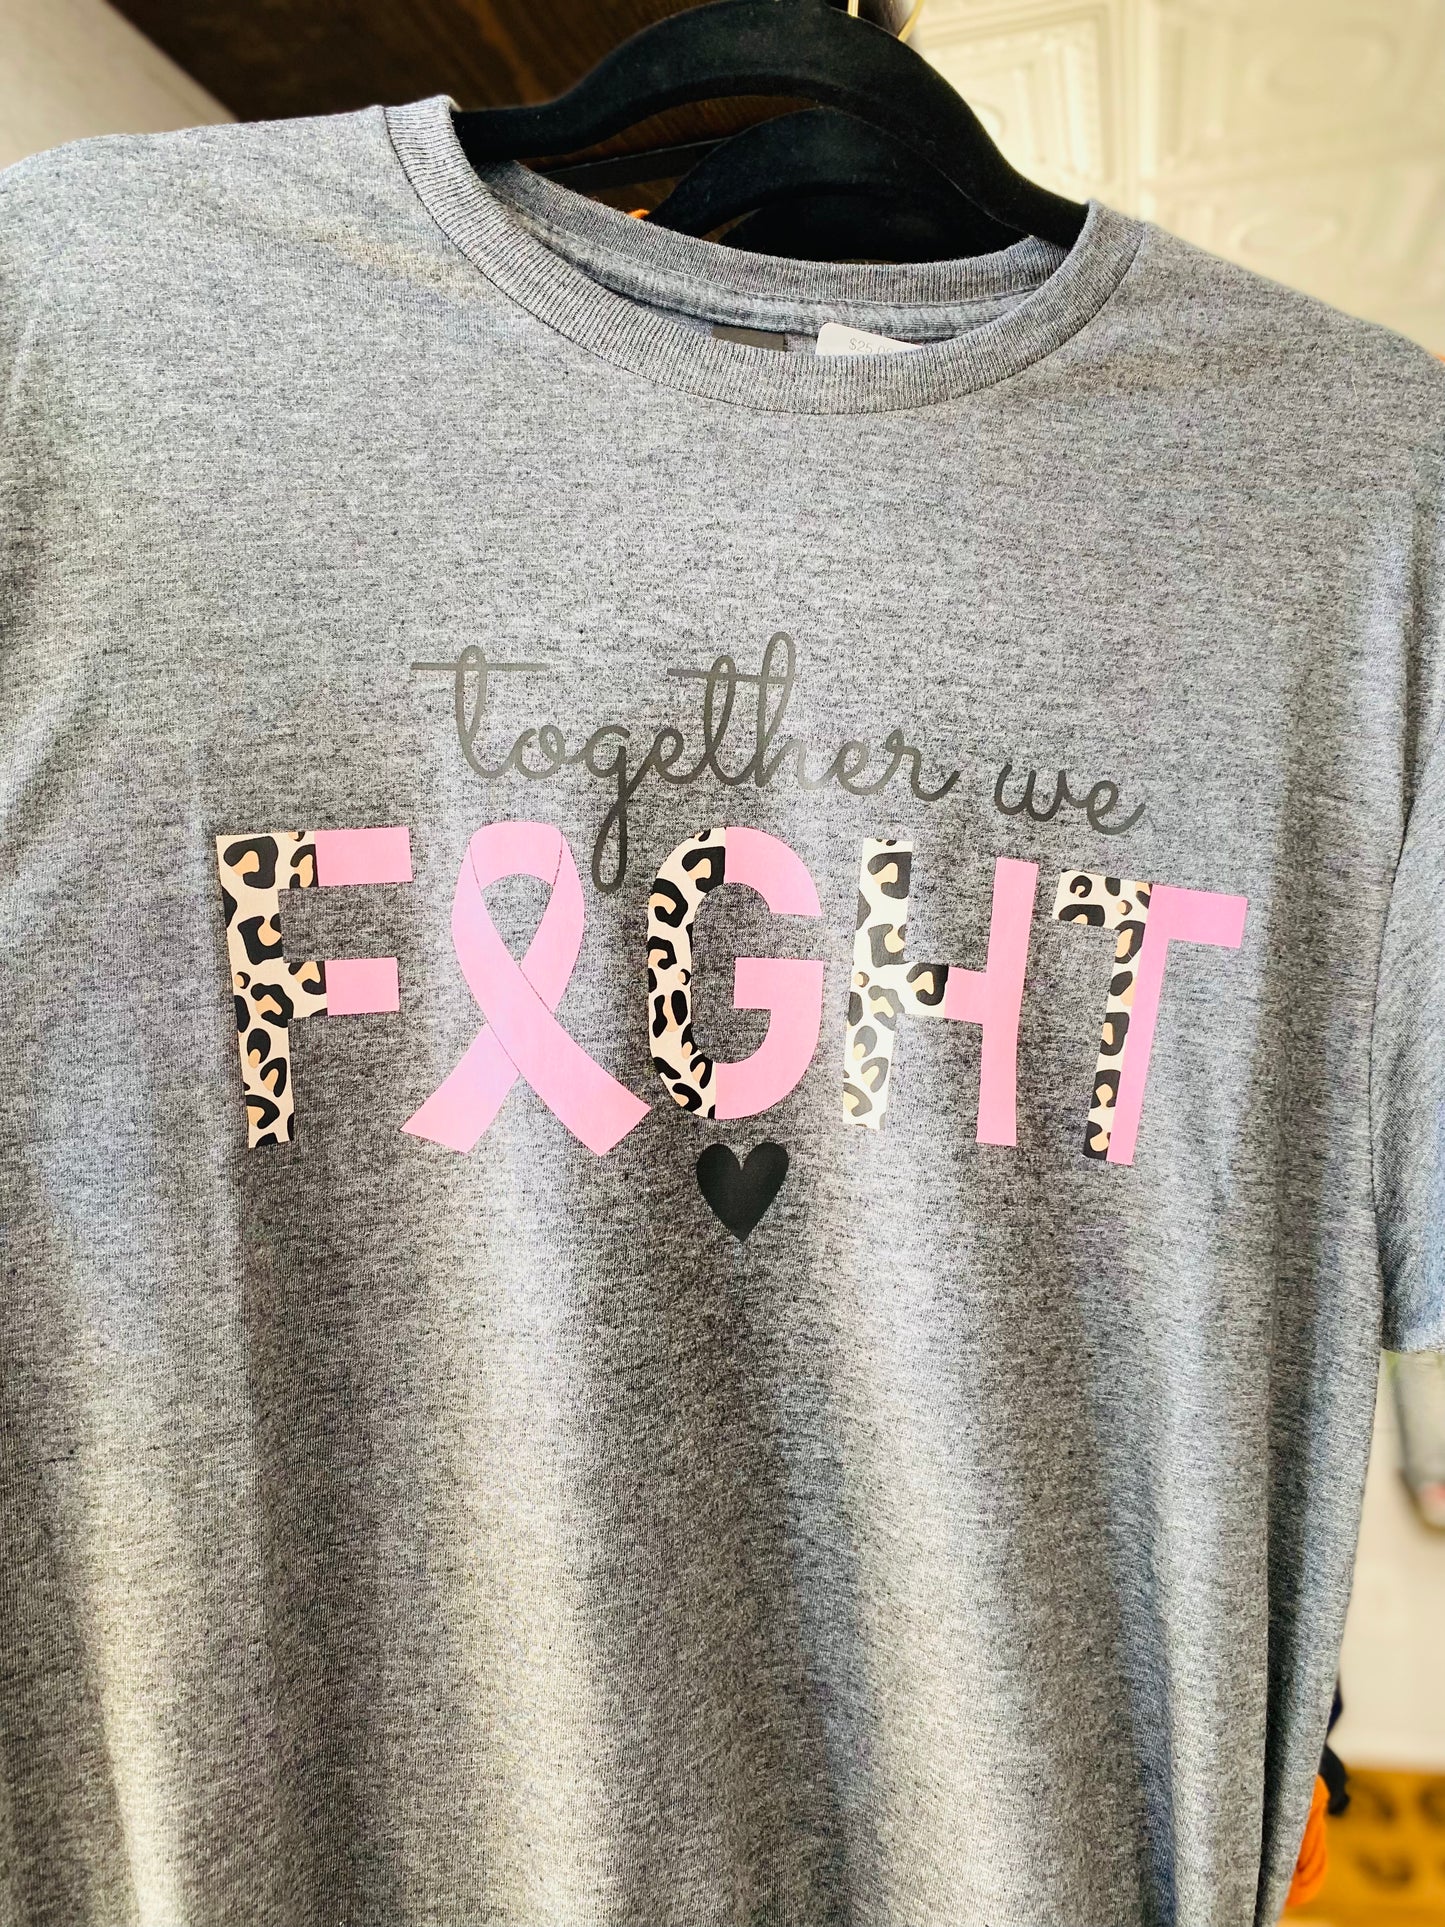 Together We Fight- Breast Cancer Awareness Tee